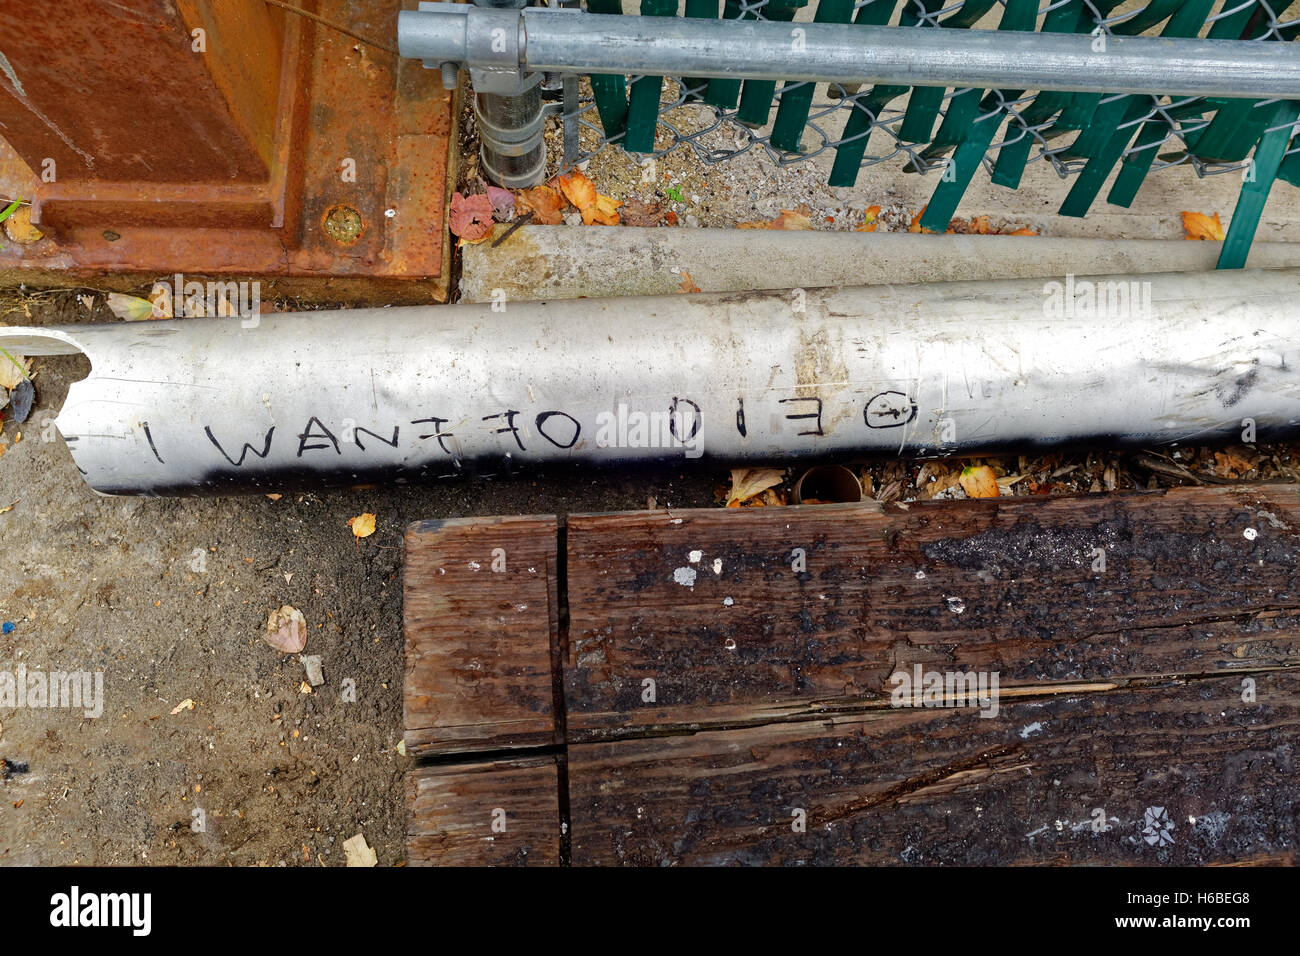 Meaning of Depression-'I WANT TO DIE' scrawled on a discarded broken piece of pipe. Stock Photo